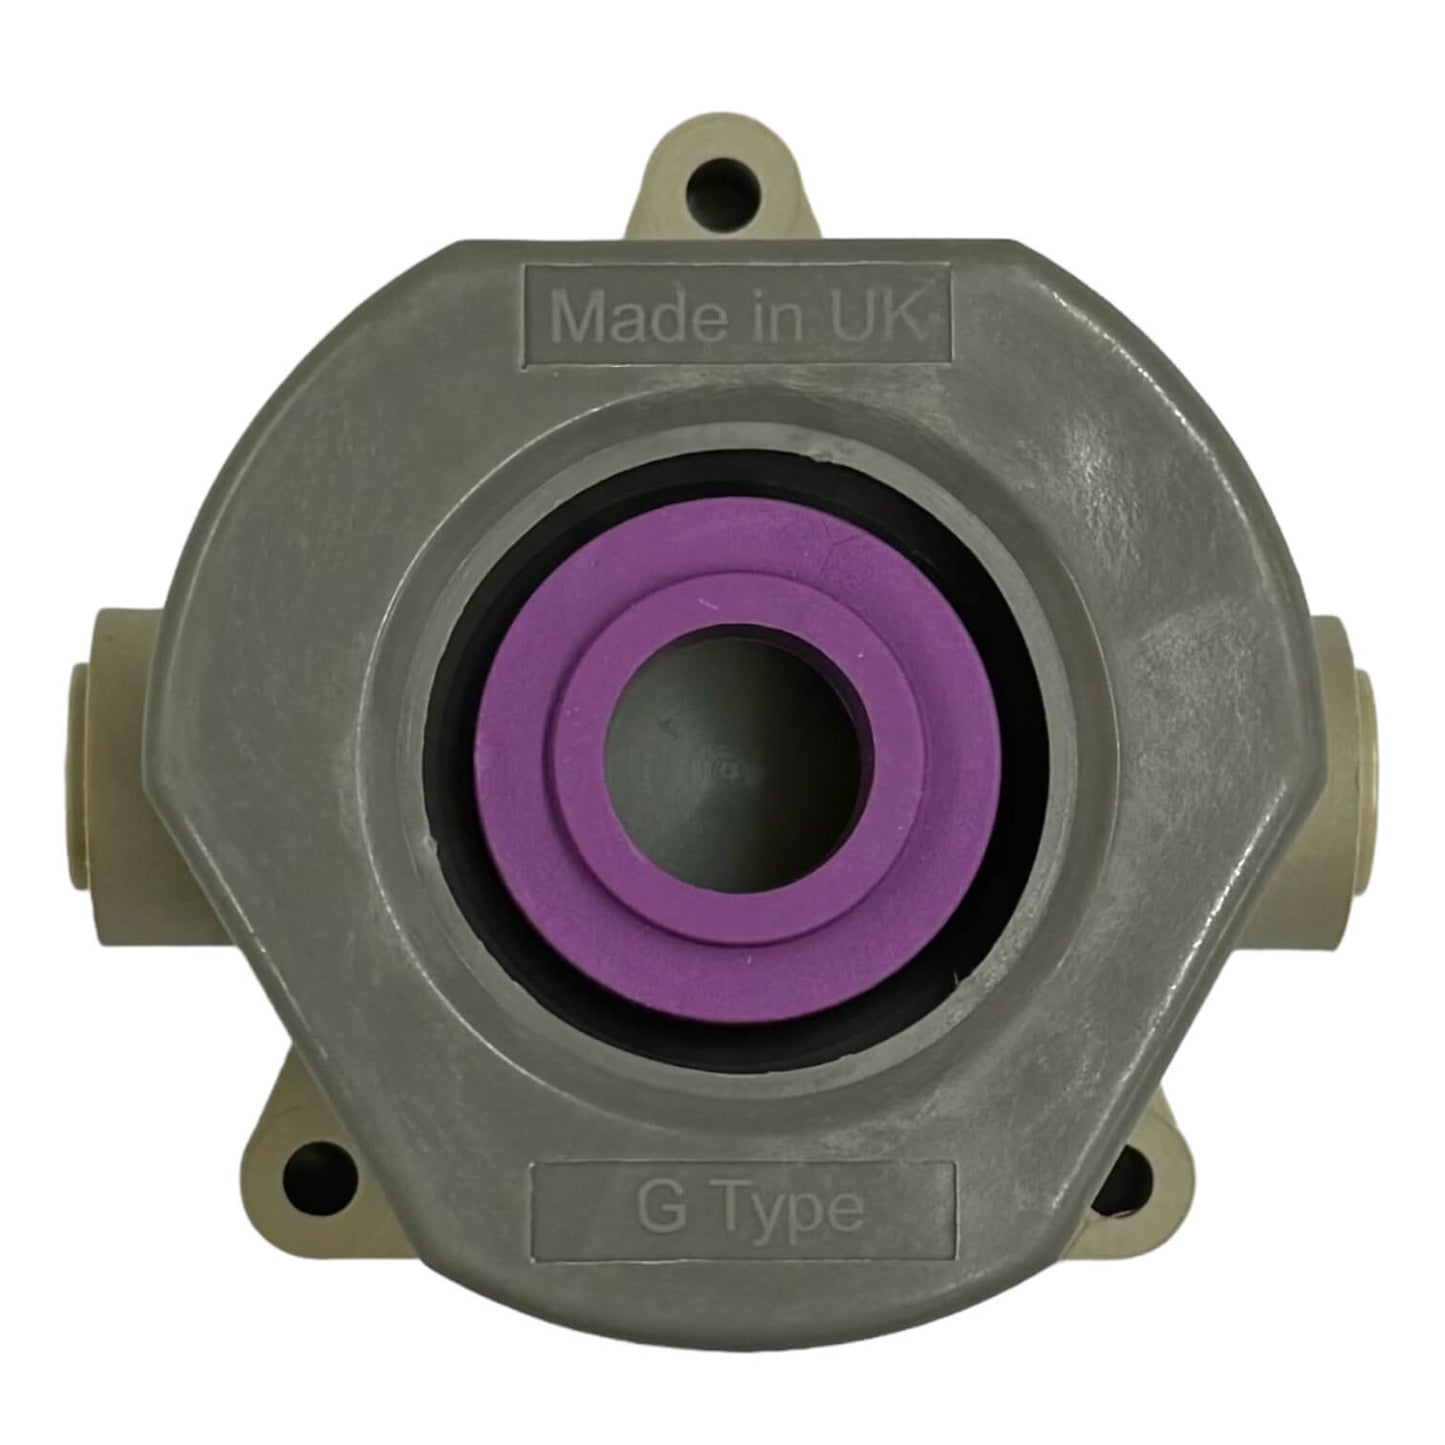 Grundy | G type cleaning socket